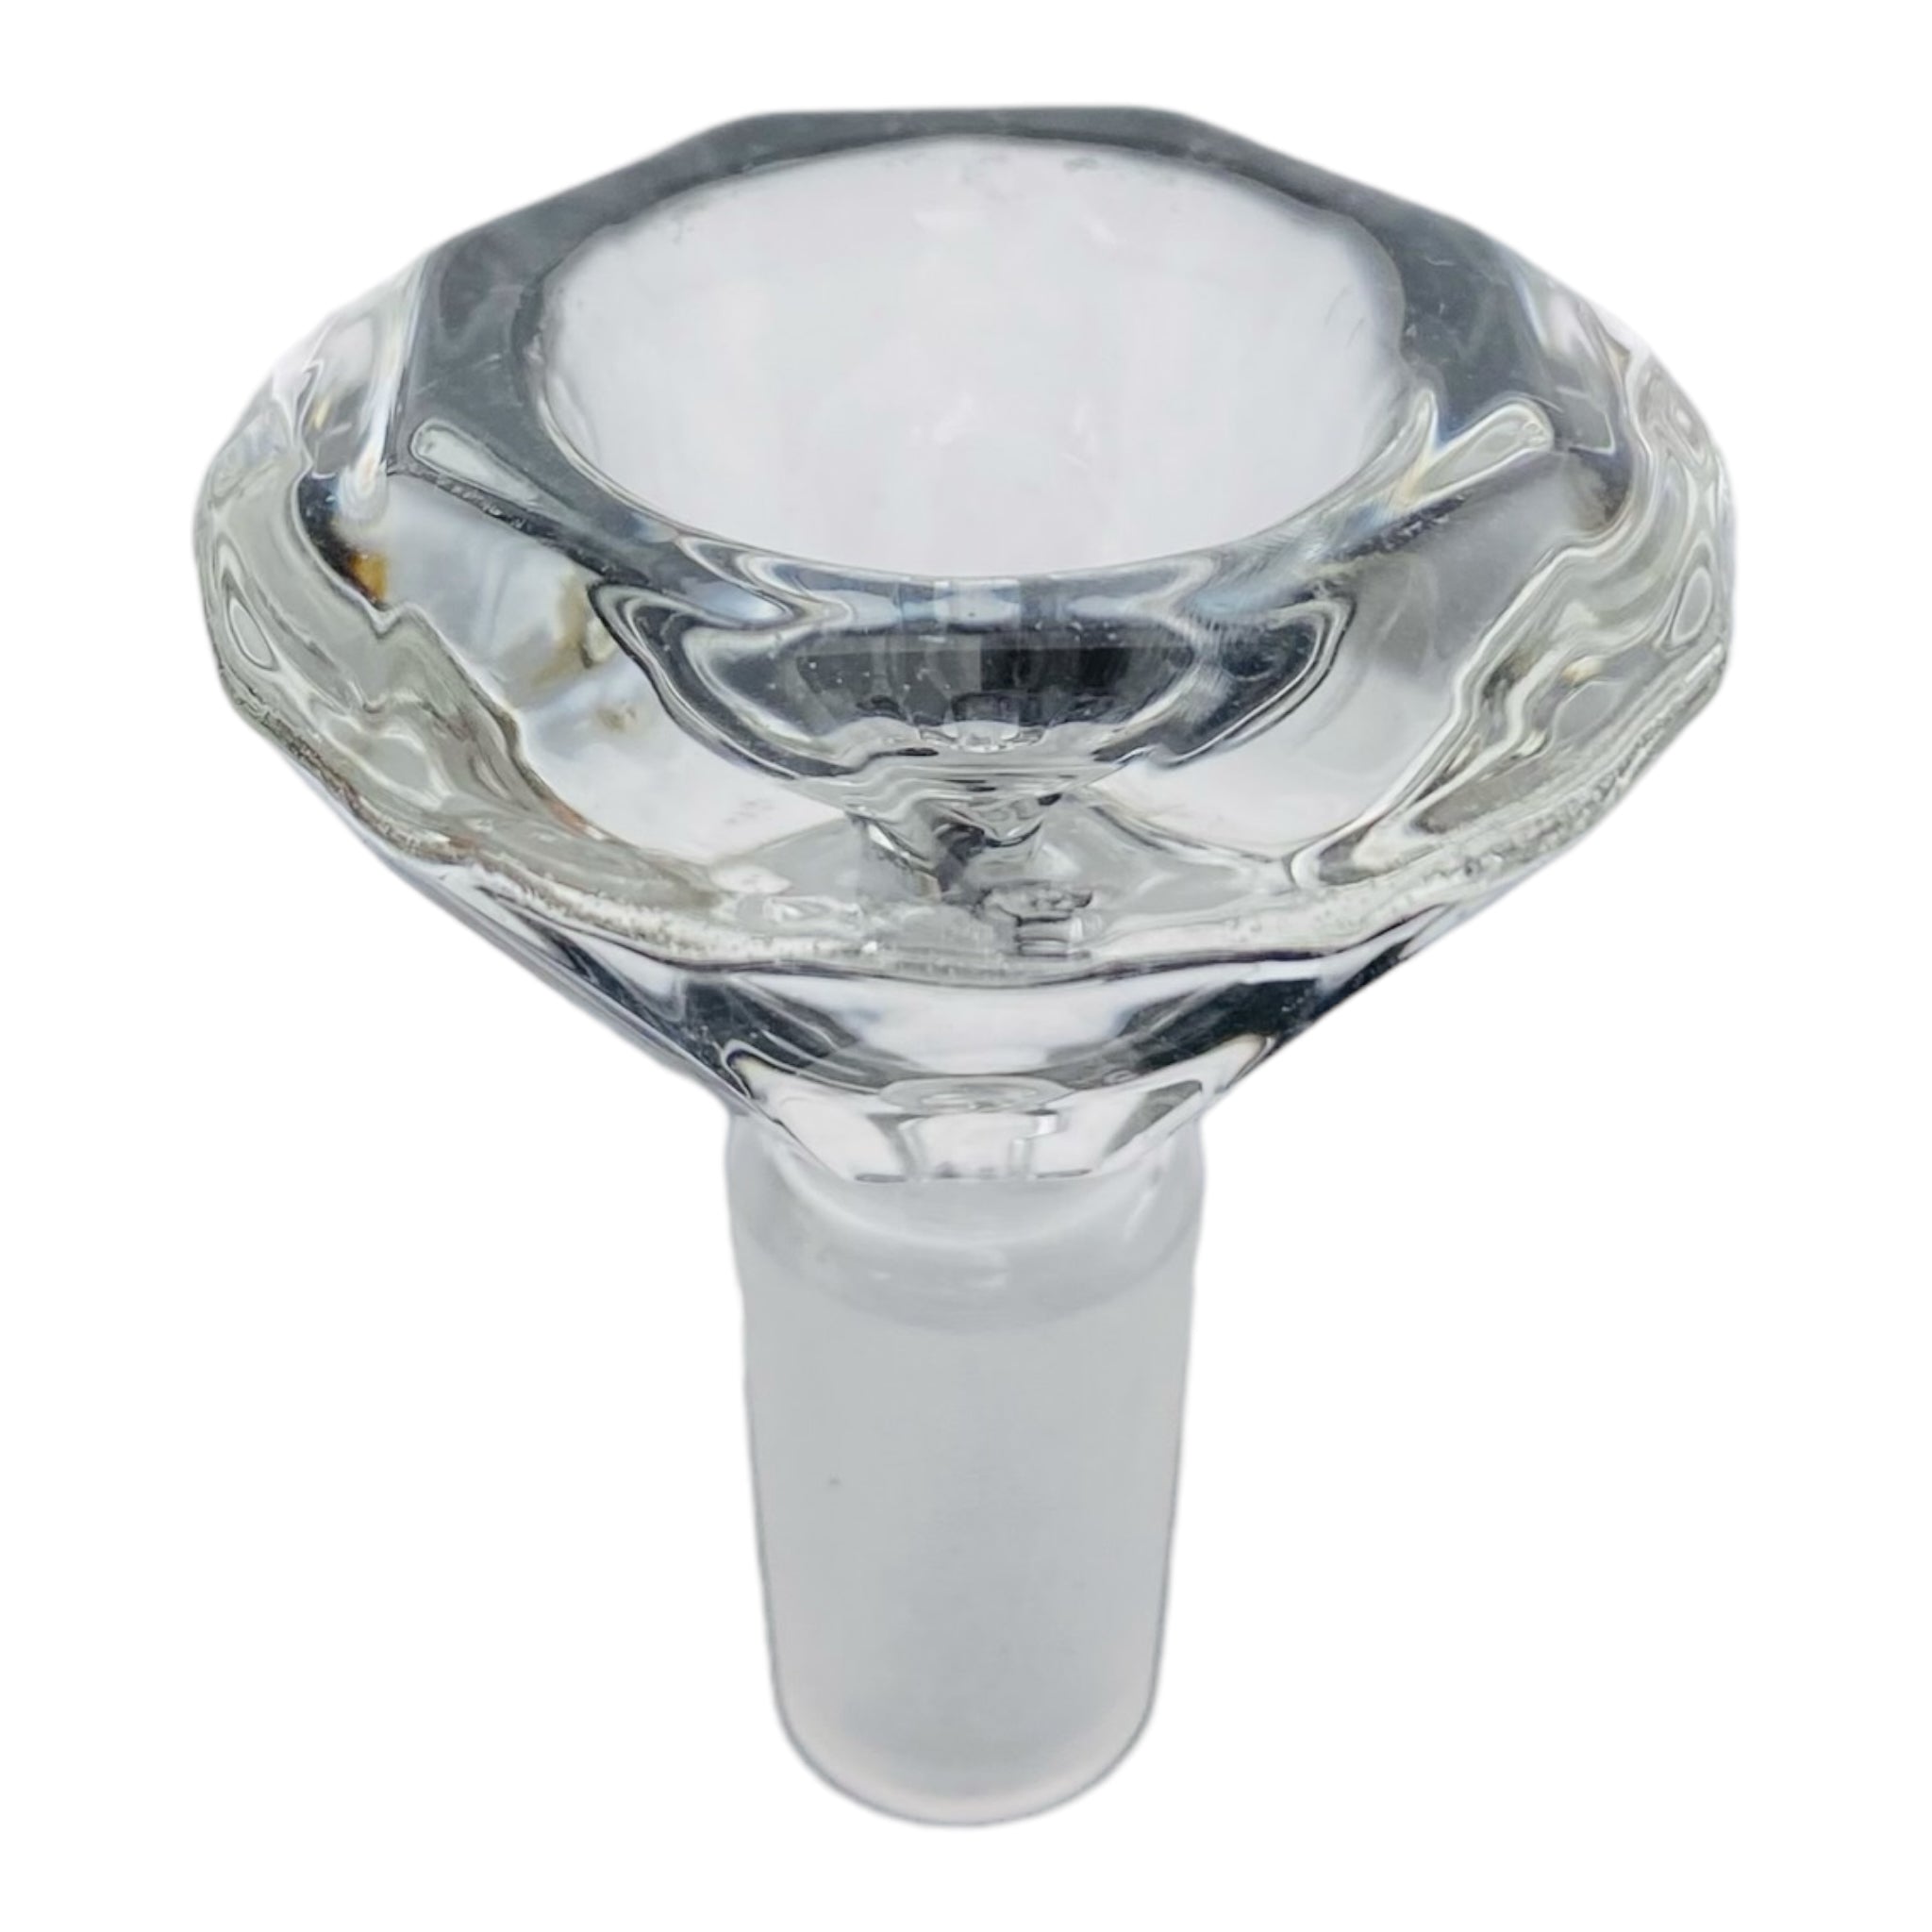 14mm Flower Bowl - Faceted Diamond Glass Bong Bowl Piece - Clear